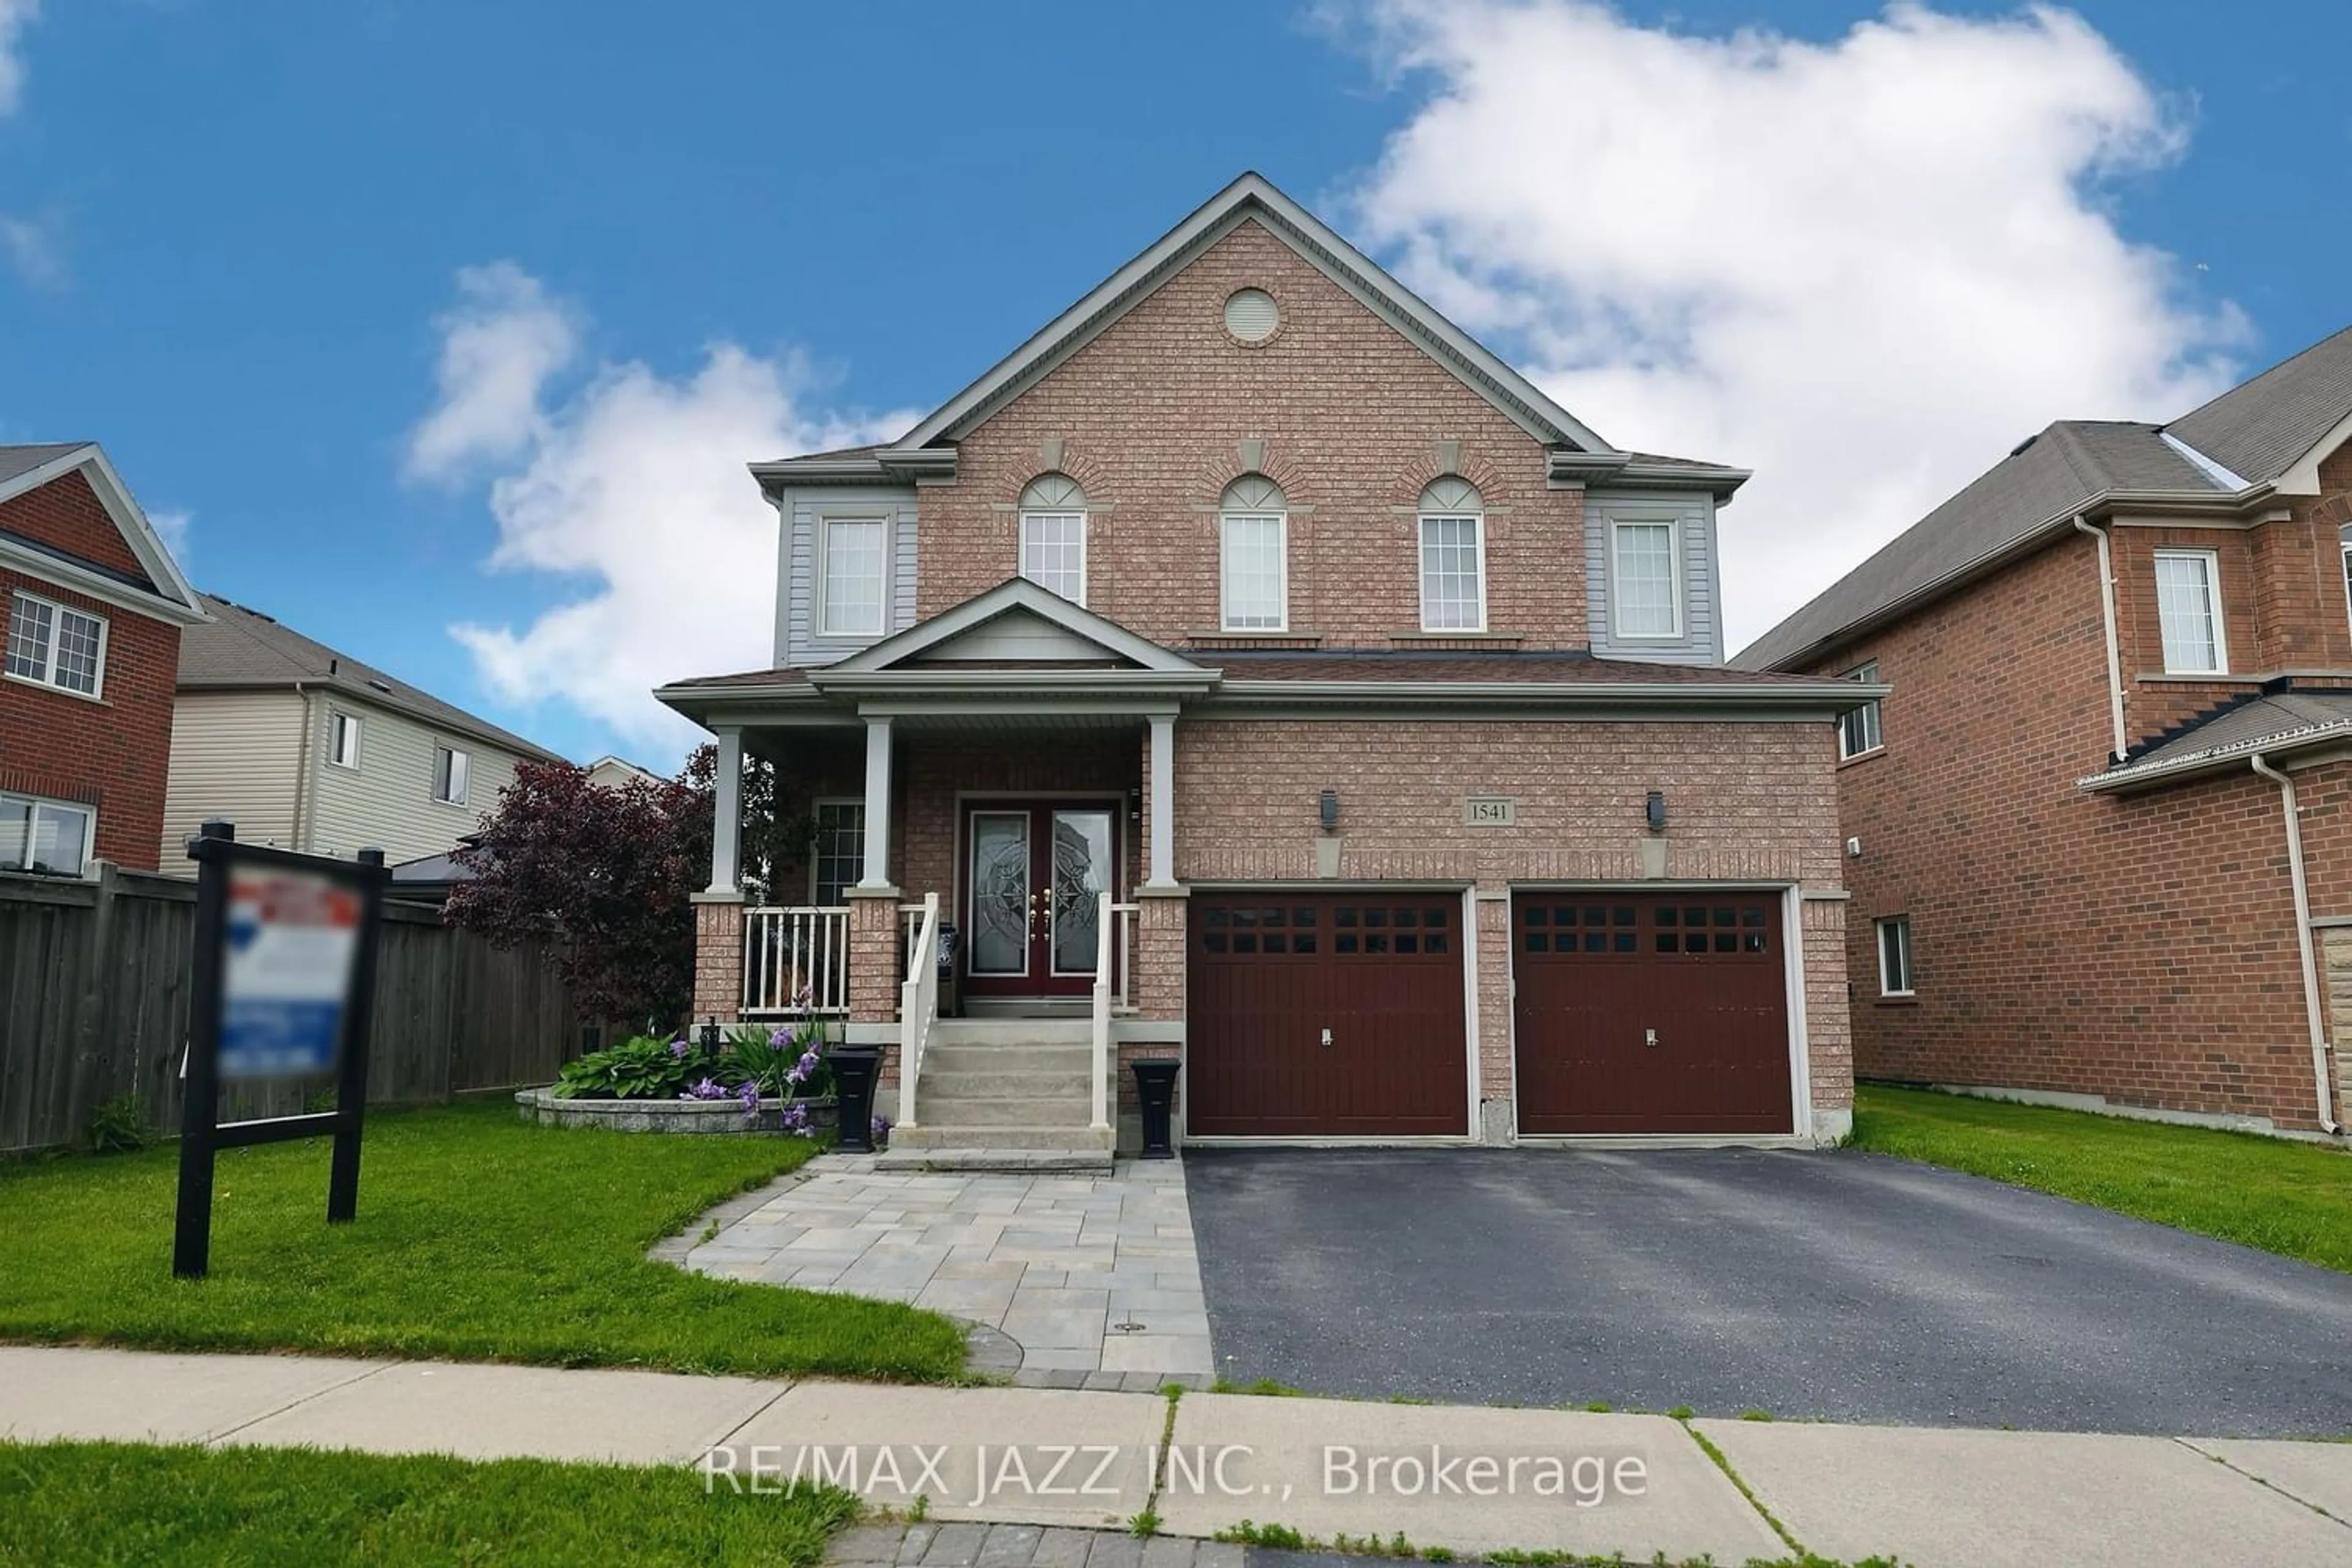 Home with brick exterior material for 1541 Rorison St, Oshawa Ontario L1K 0K2